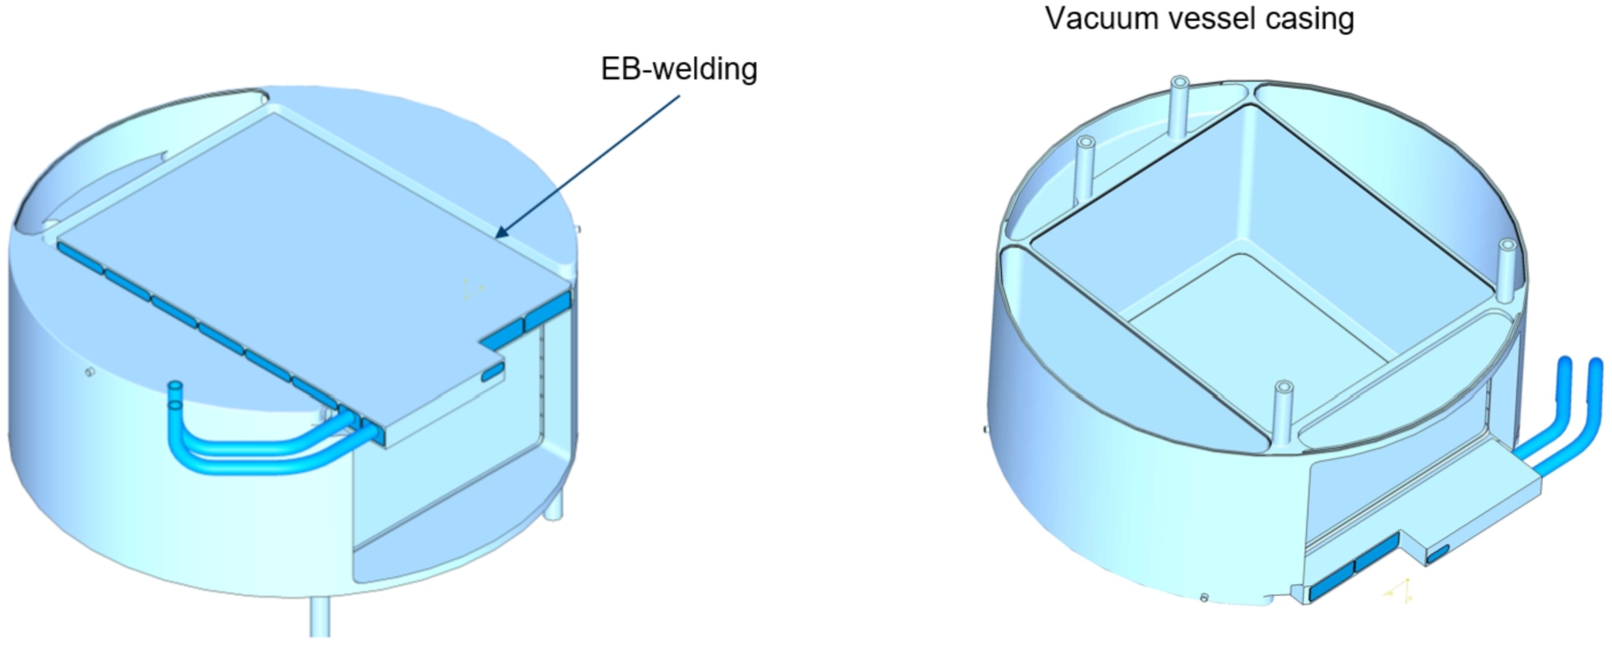 Assembly and EB-welding of the vacuum vessel (premoderator).